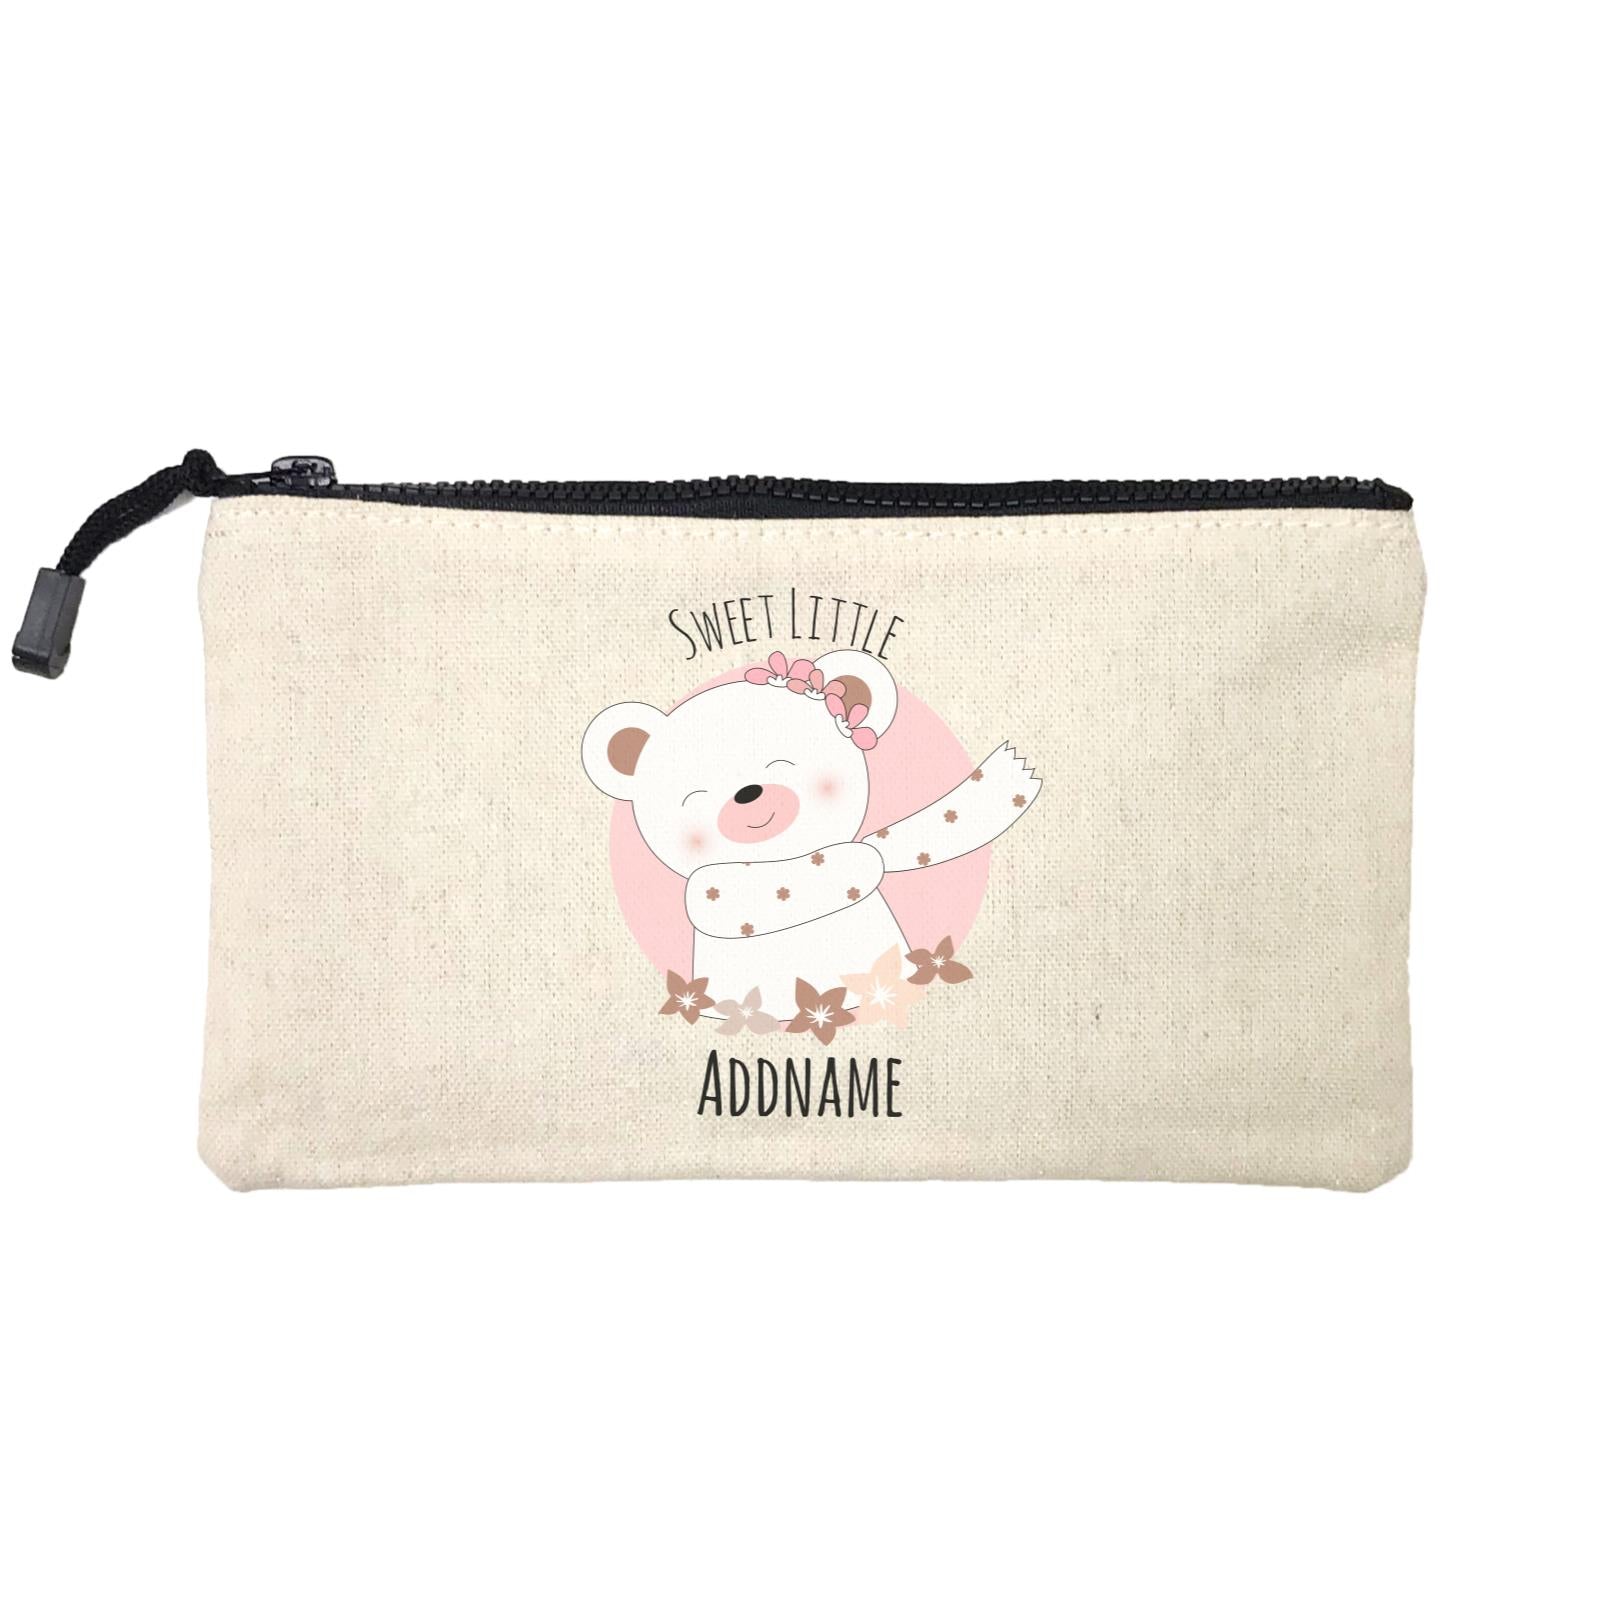 Sweet Animals Sketches Bear Sweet Little Addname Mini Accessories Stationery Pouch